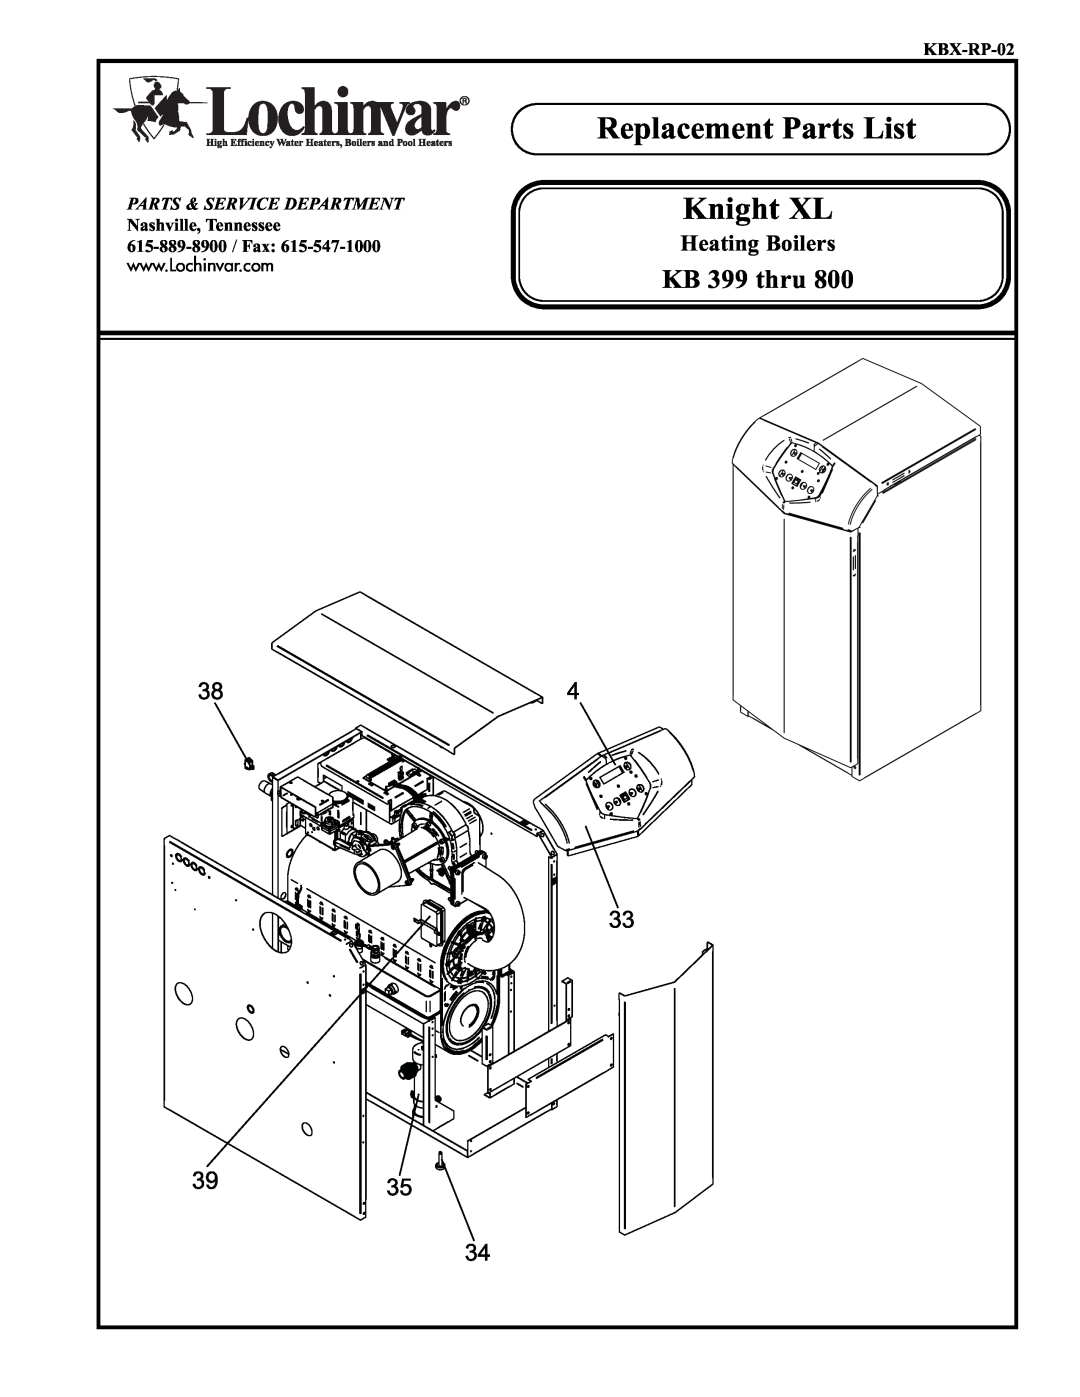 Lochinvar KB 399 thru 800 manual Replacement Parts List, Knight XL, Heating Boilers, KBX-RP-02, Parts & Service Department 